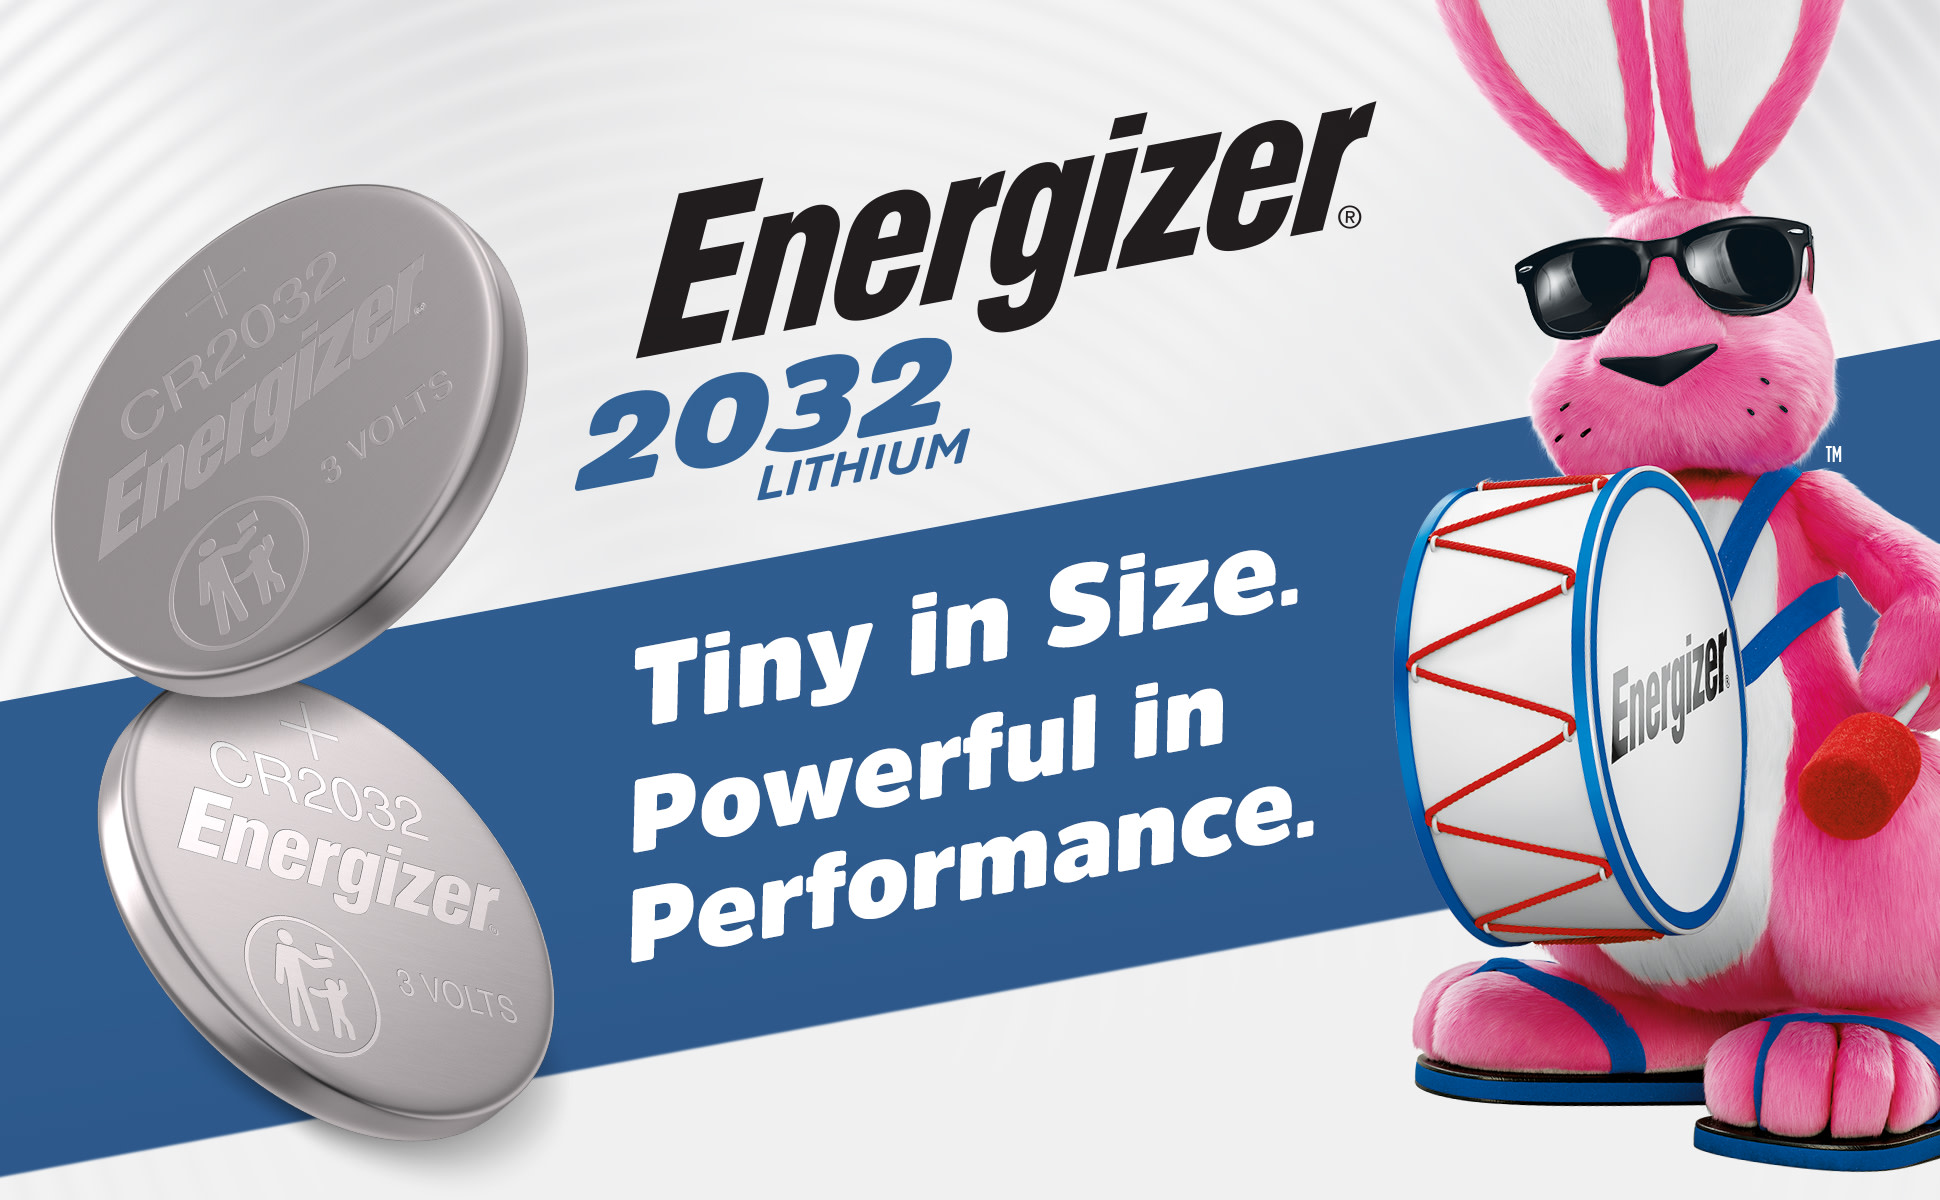 Energizer 2032 Batteries (4-Pack), 3V Lithium Coin Batteries 2032BP-4 - The  Home Depot